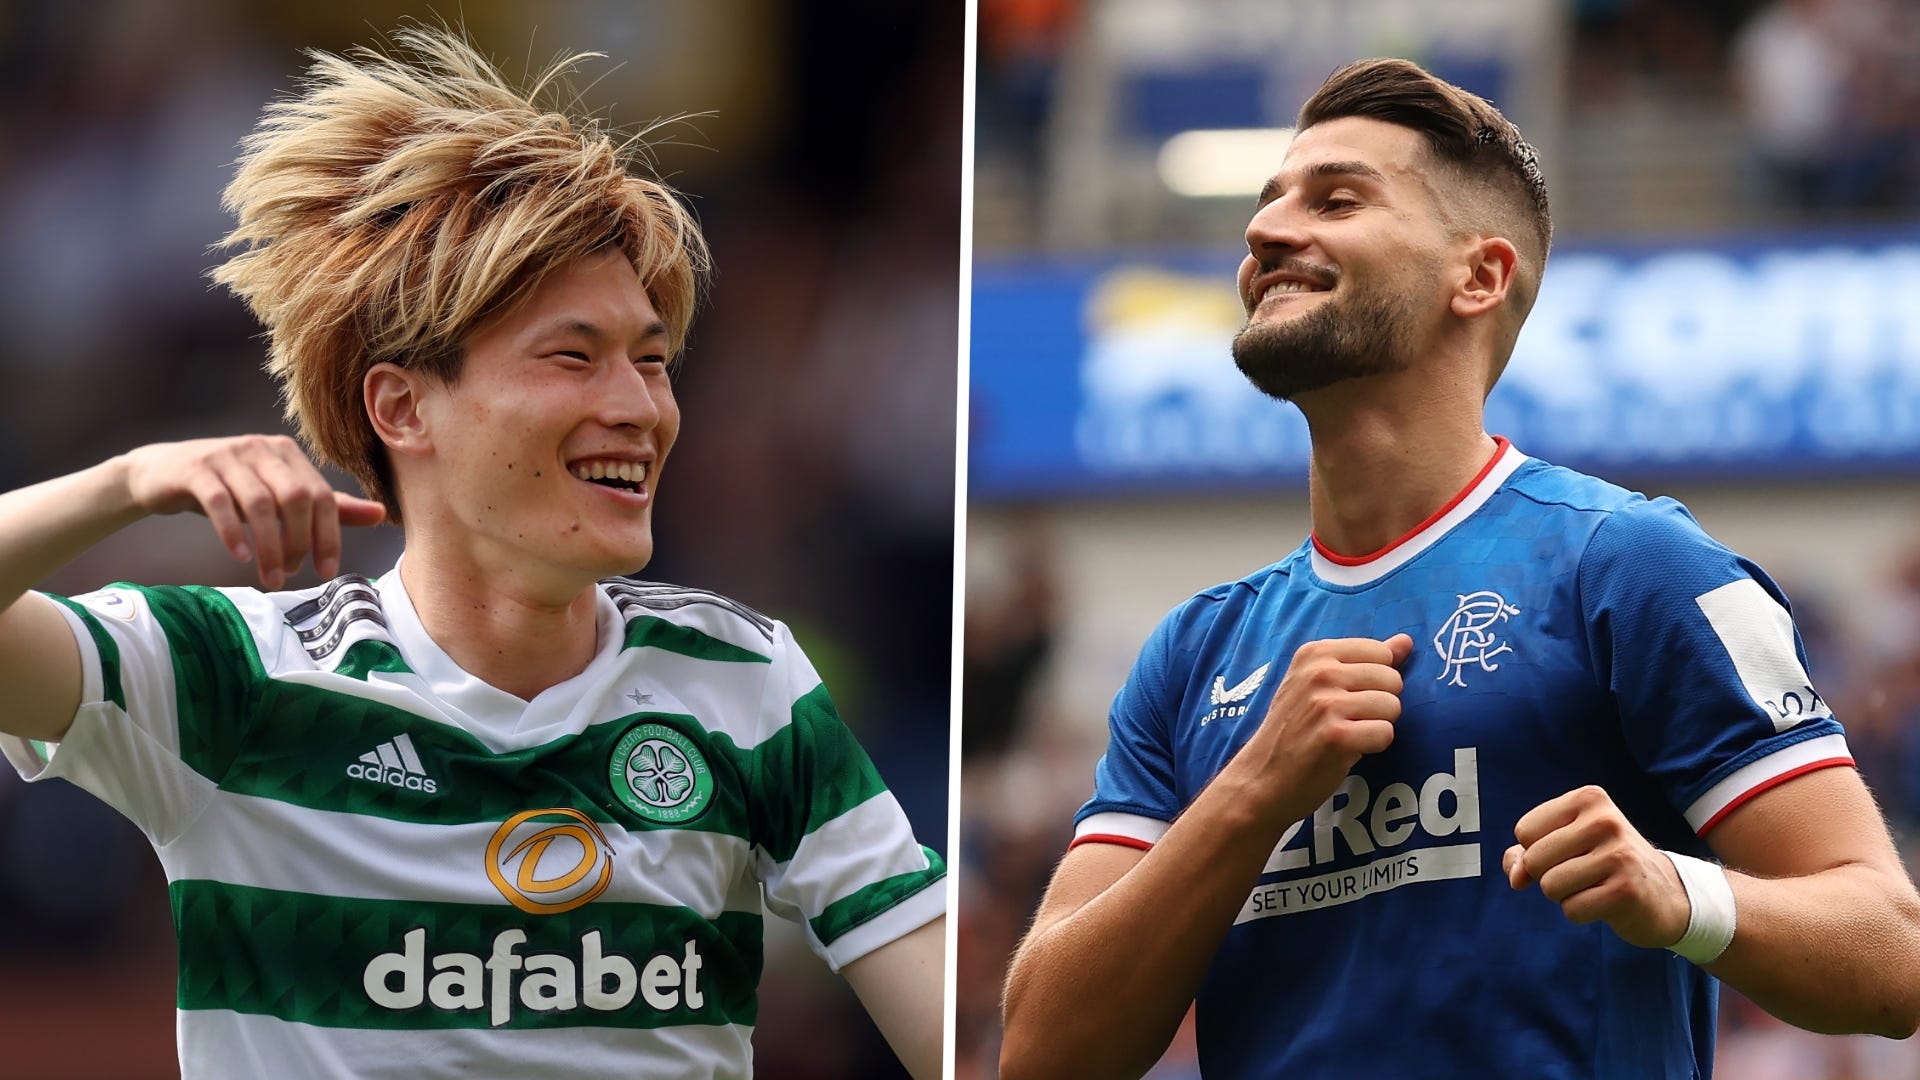 Celtic vs Rangers Live stream, TV channel, kick-off time and how to watch Goal US